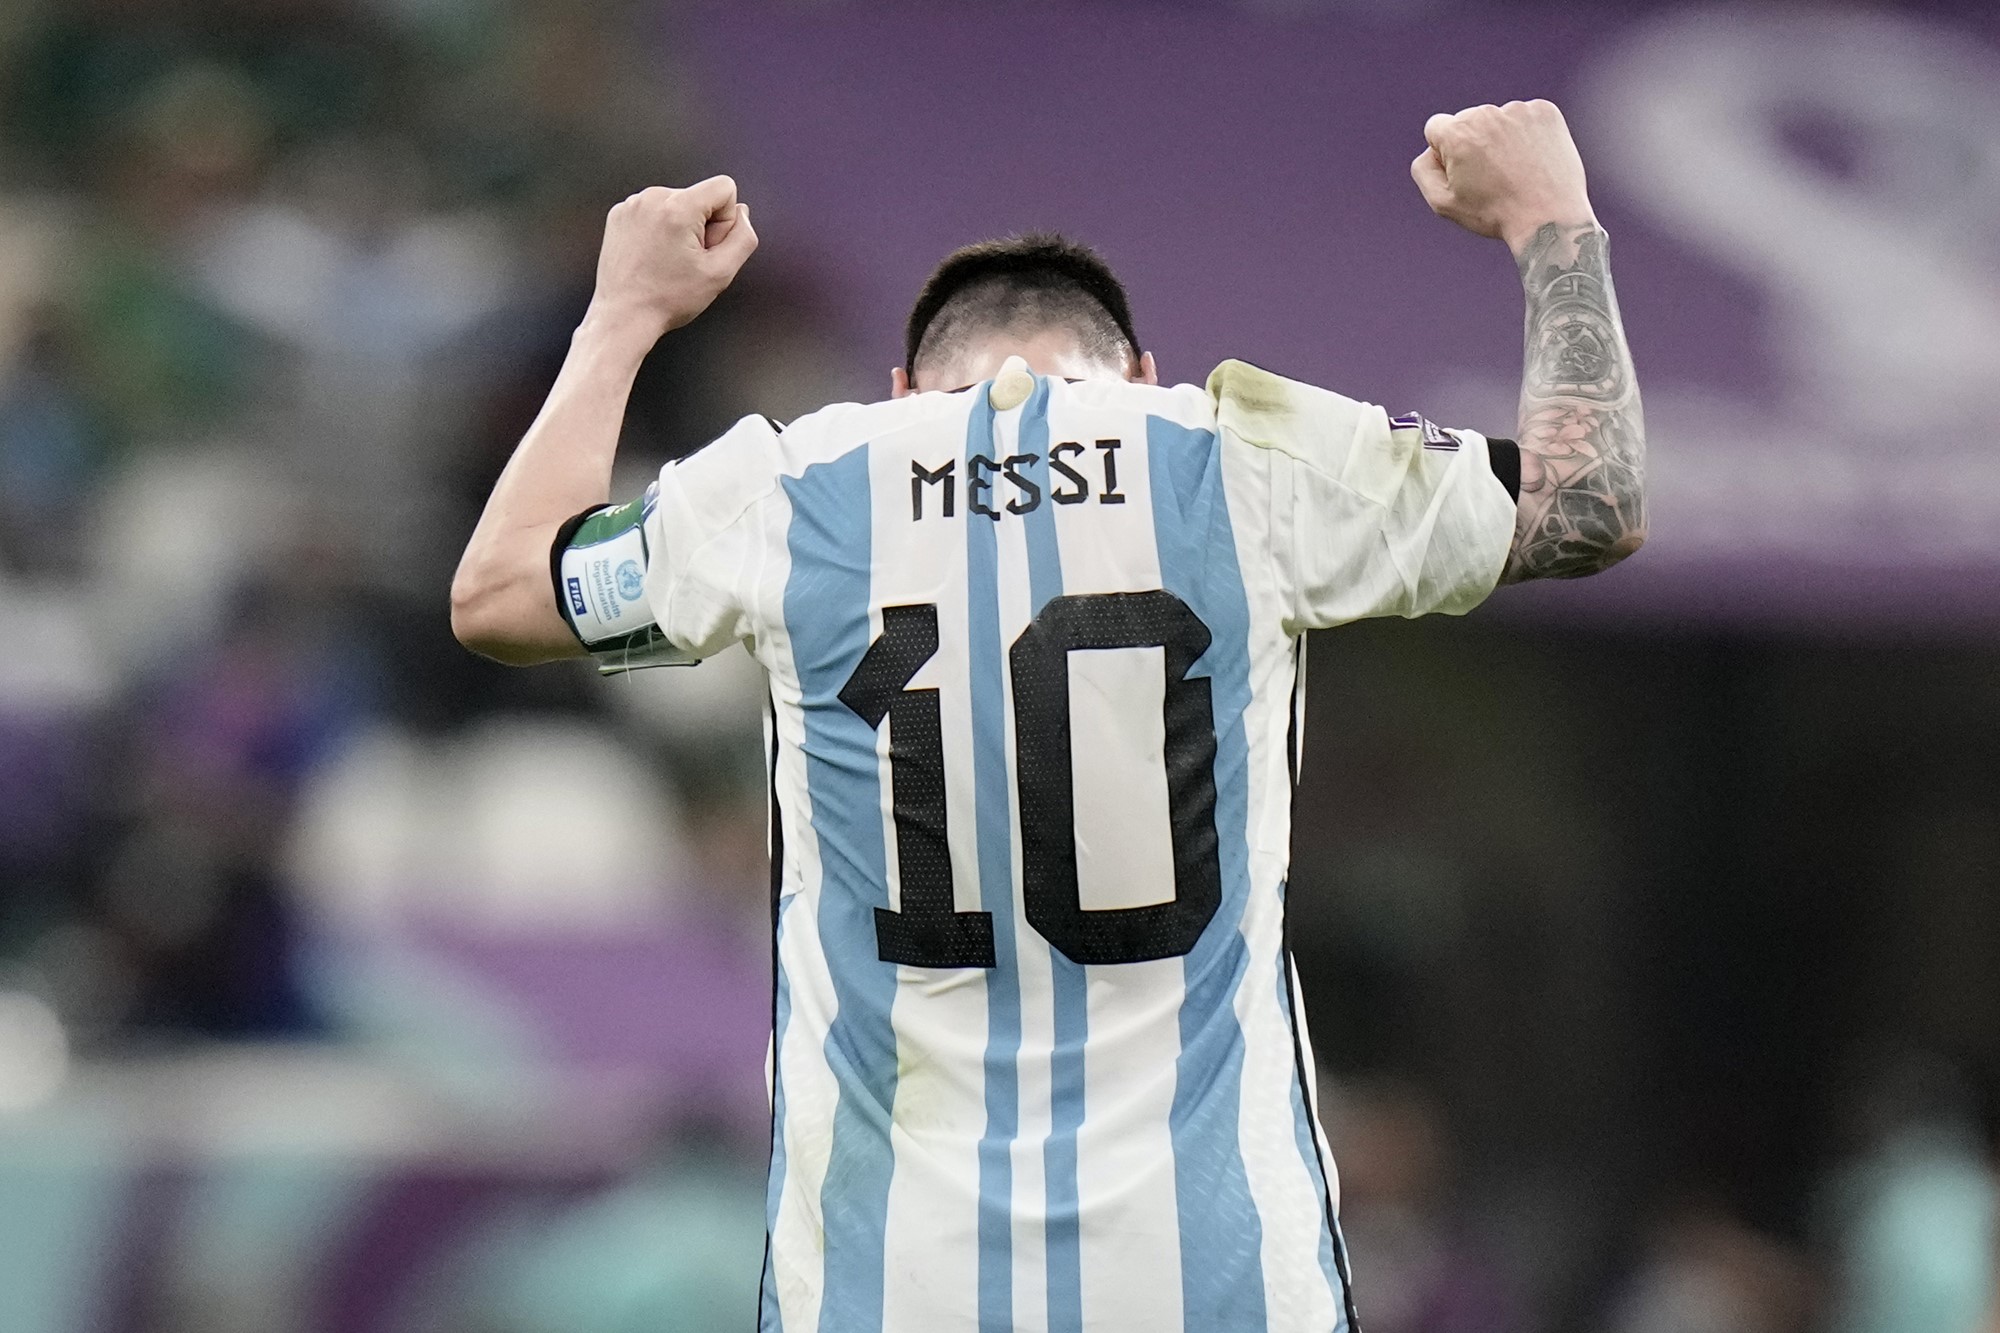 Argentina's Lionel Messi puts his head down and his fists up in celebration in this photo taken from behind showing his Messi, number 10 shirt.